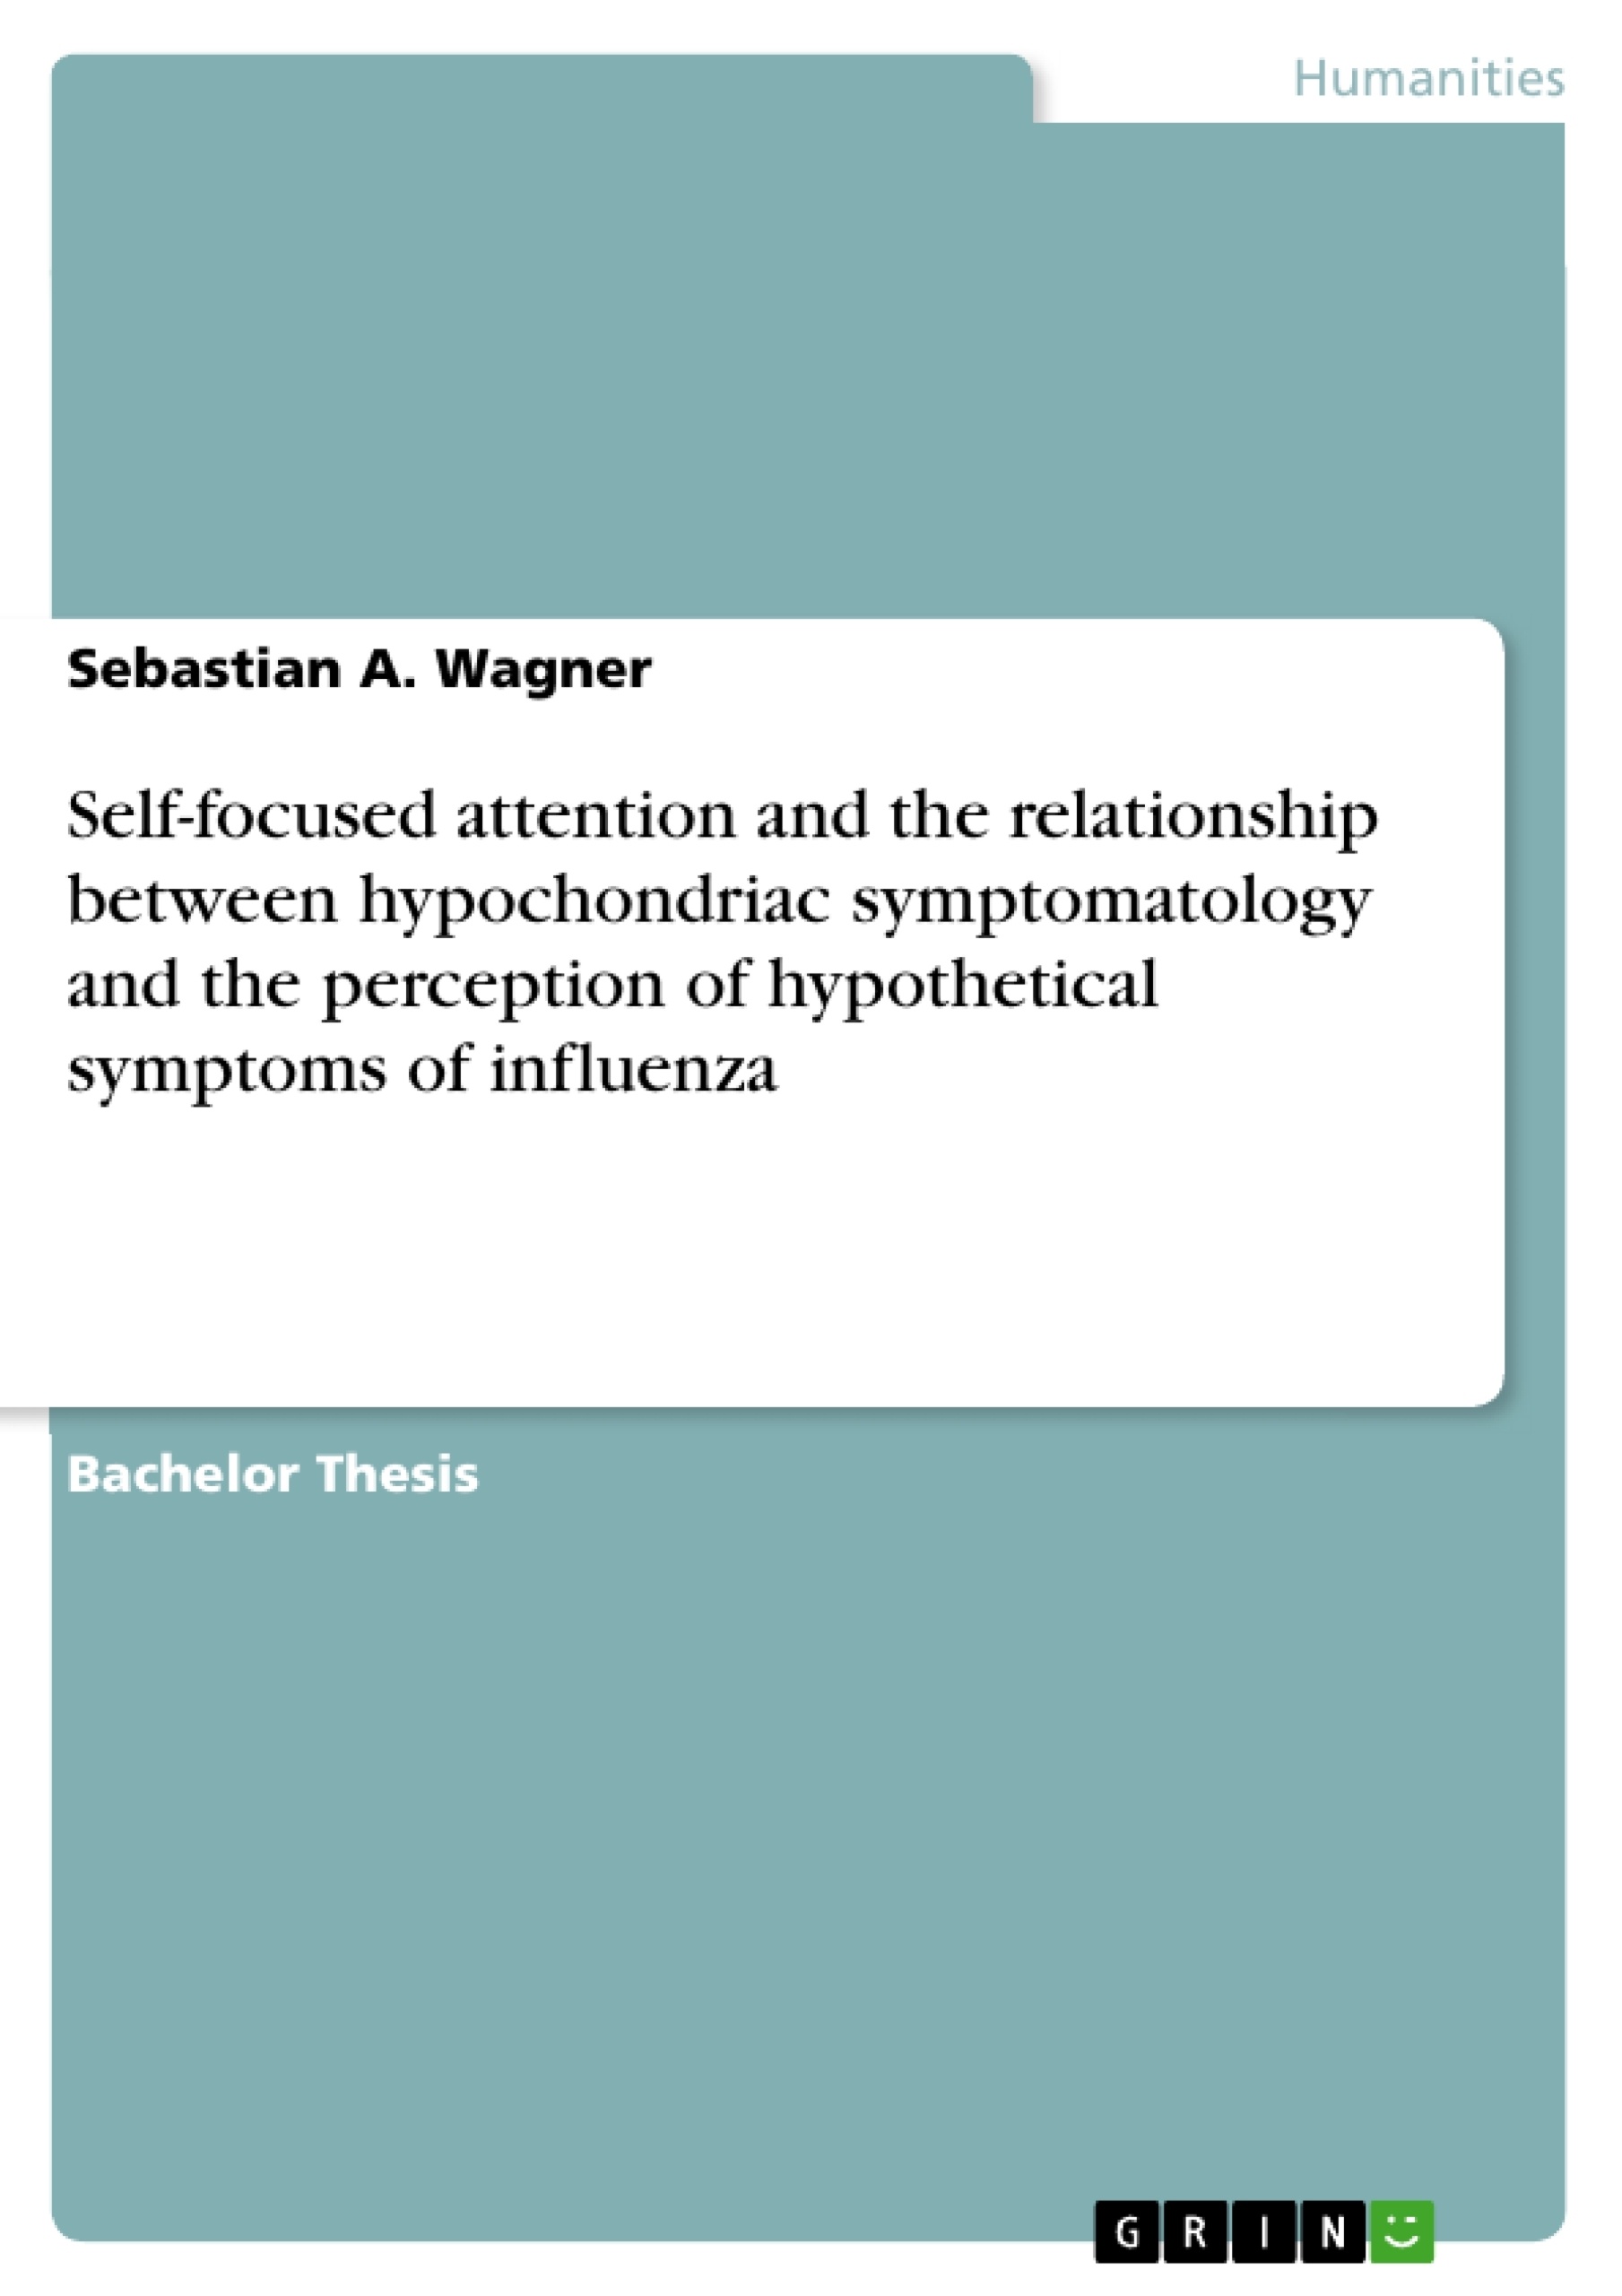 Title: Self-focused attention and the relationship between hypochondriac symptomatology and the perception of hypothetical symptoms of influenza